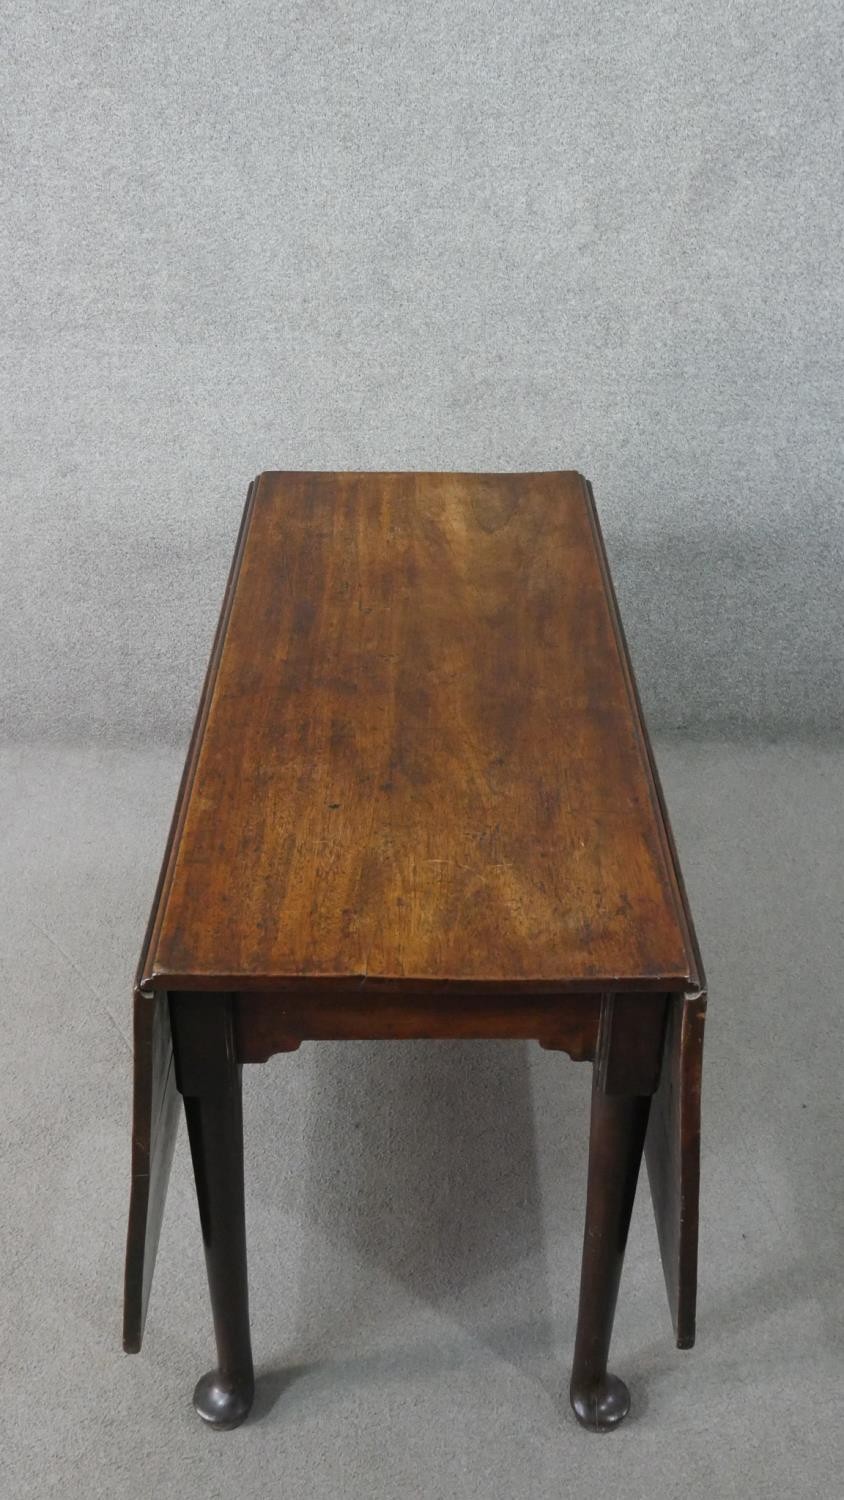 A mid 18th century mahogany drop leaf dining table, with a rectangular top, the legs with pad - Image 2 of 7